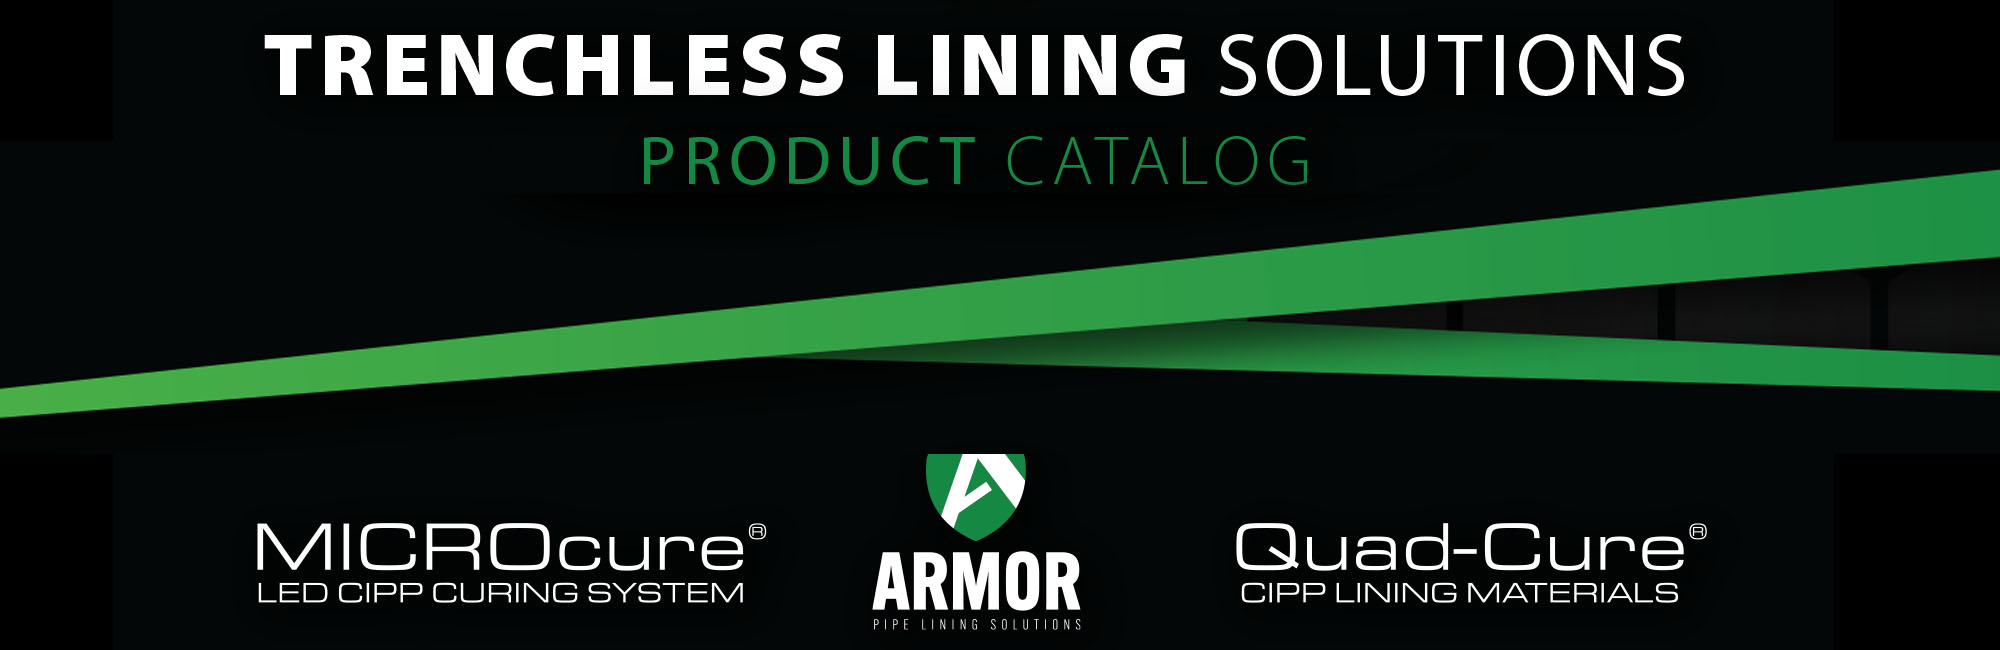 Trenchless Lining Solutions Product Catalog Banner